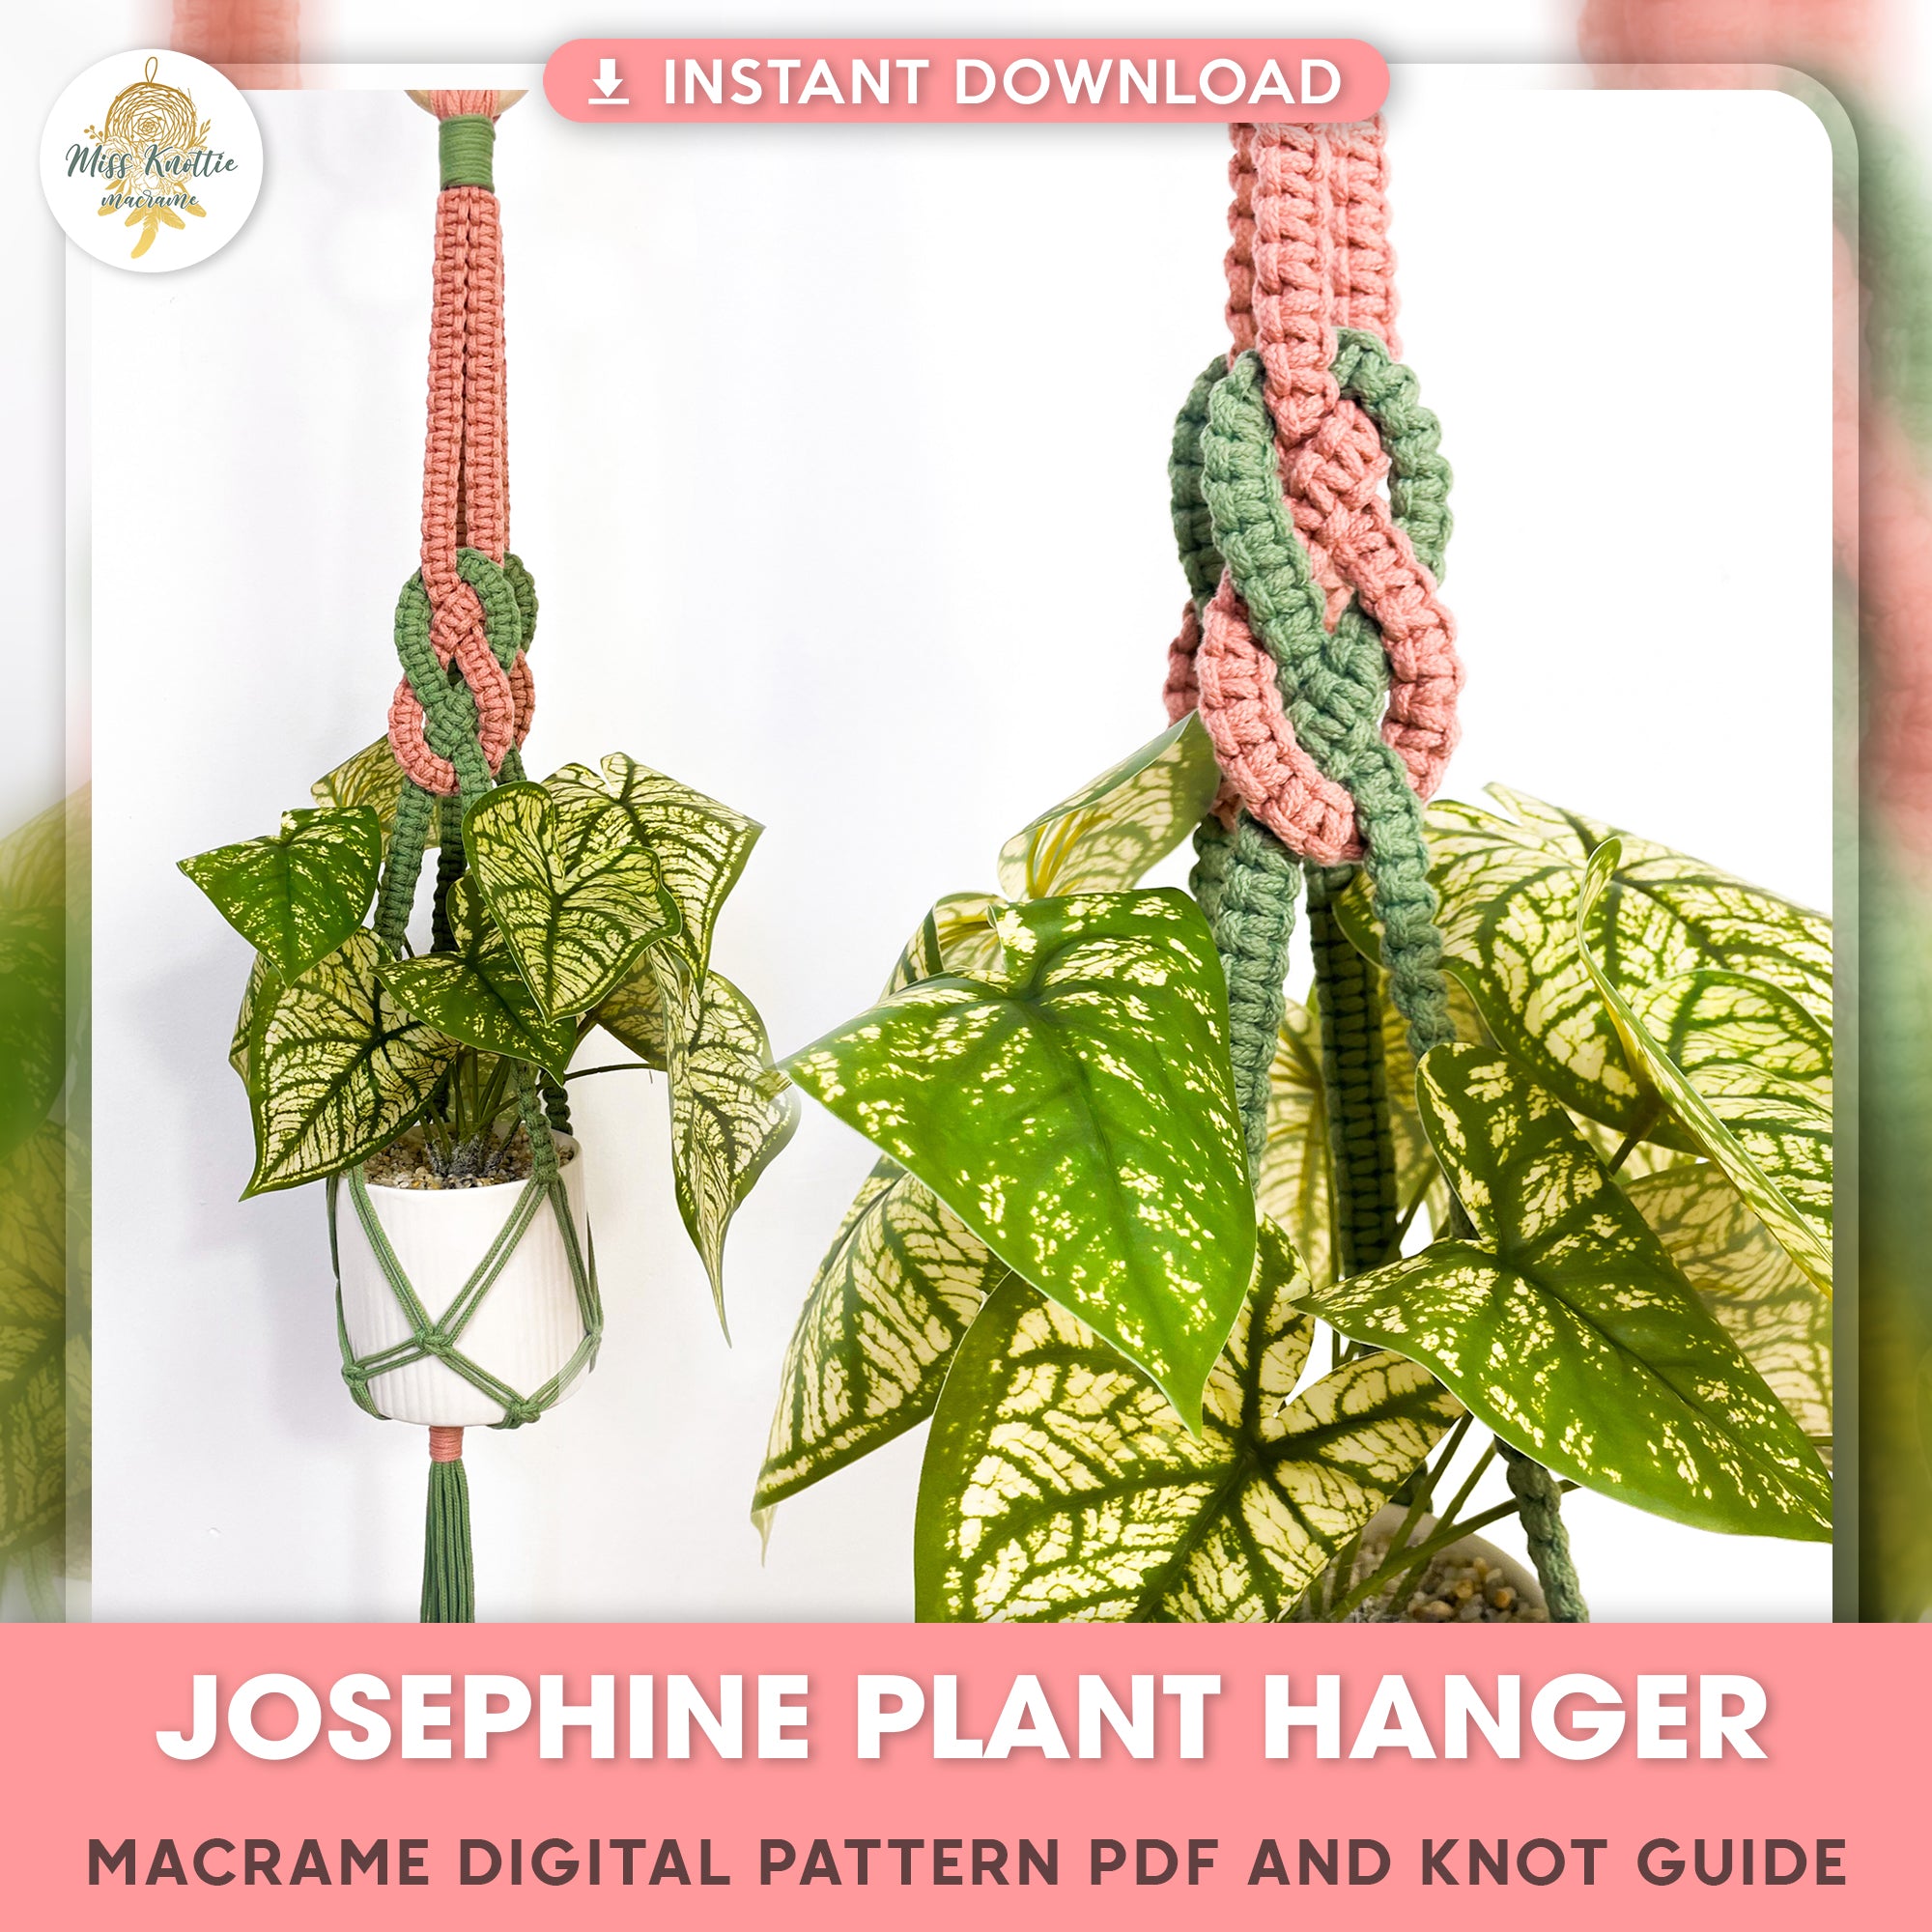 Josephine Plant Hanger - Digital PDF and Knot Guide